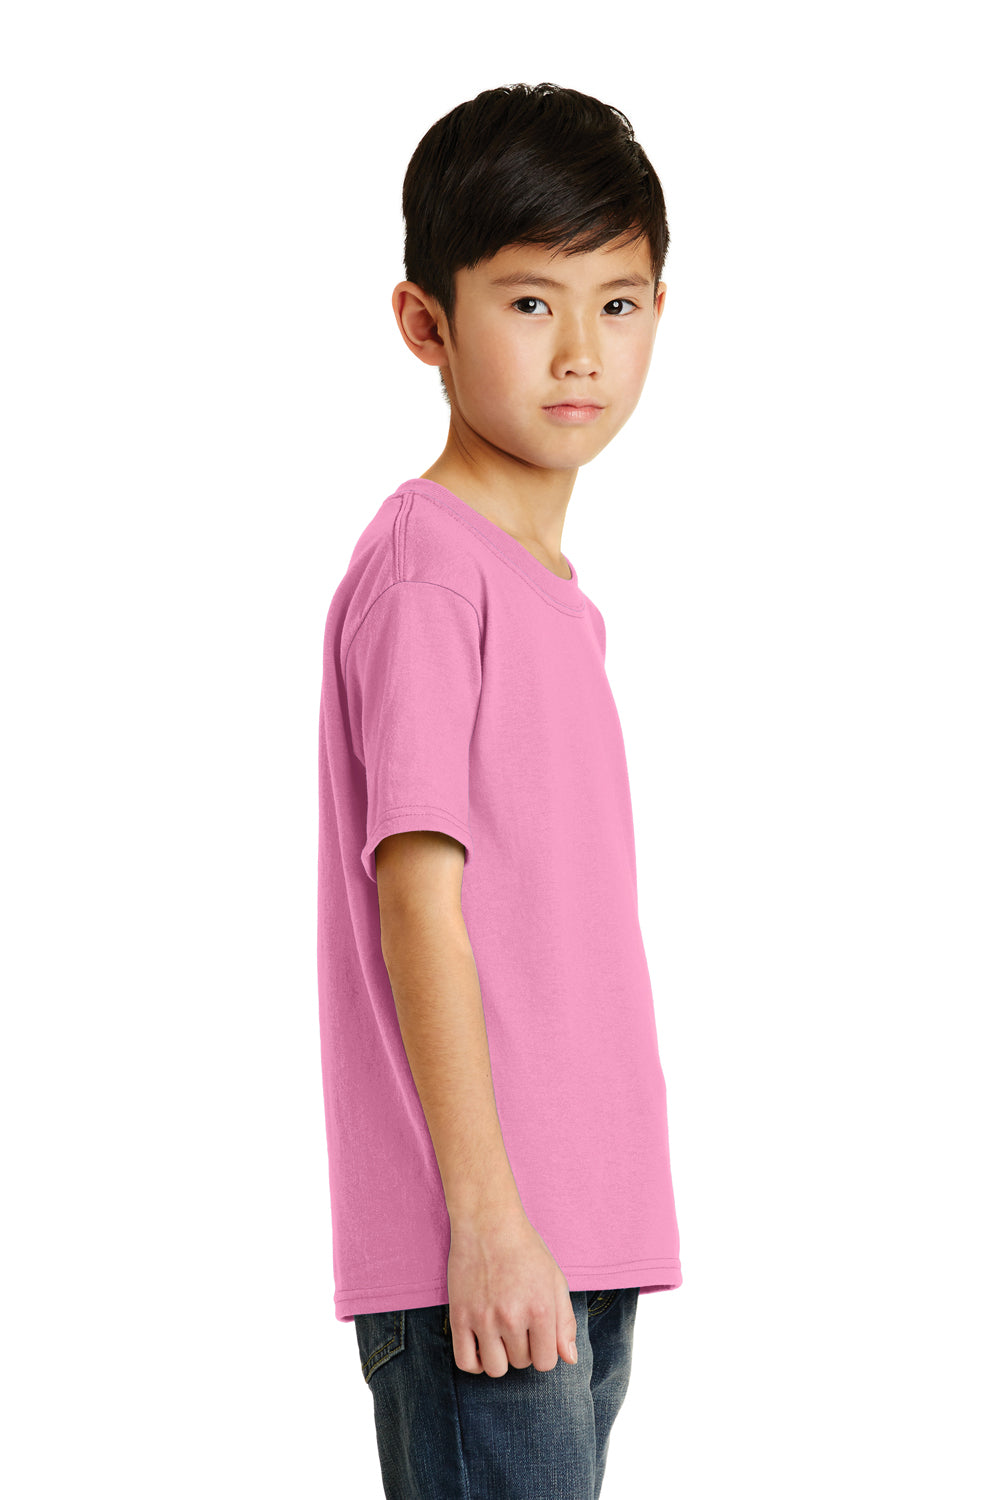 Port & Company PC55Y Youth Core Short Sleeve Crewneck T-Shirt Candy Pink Side